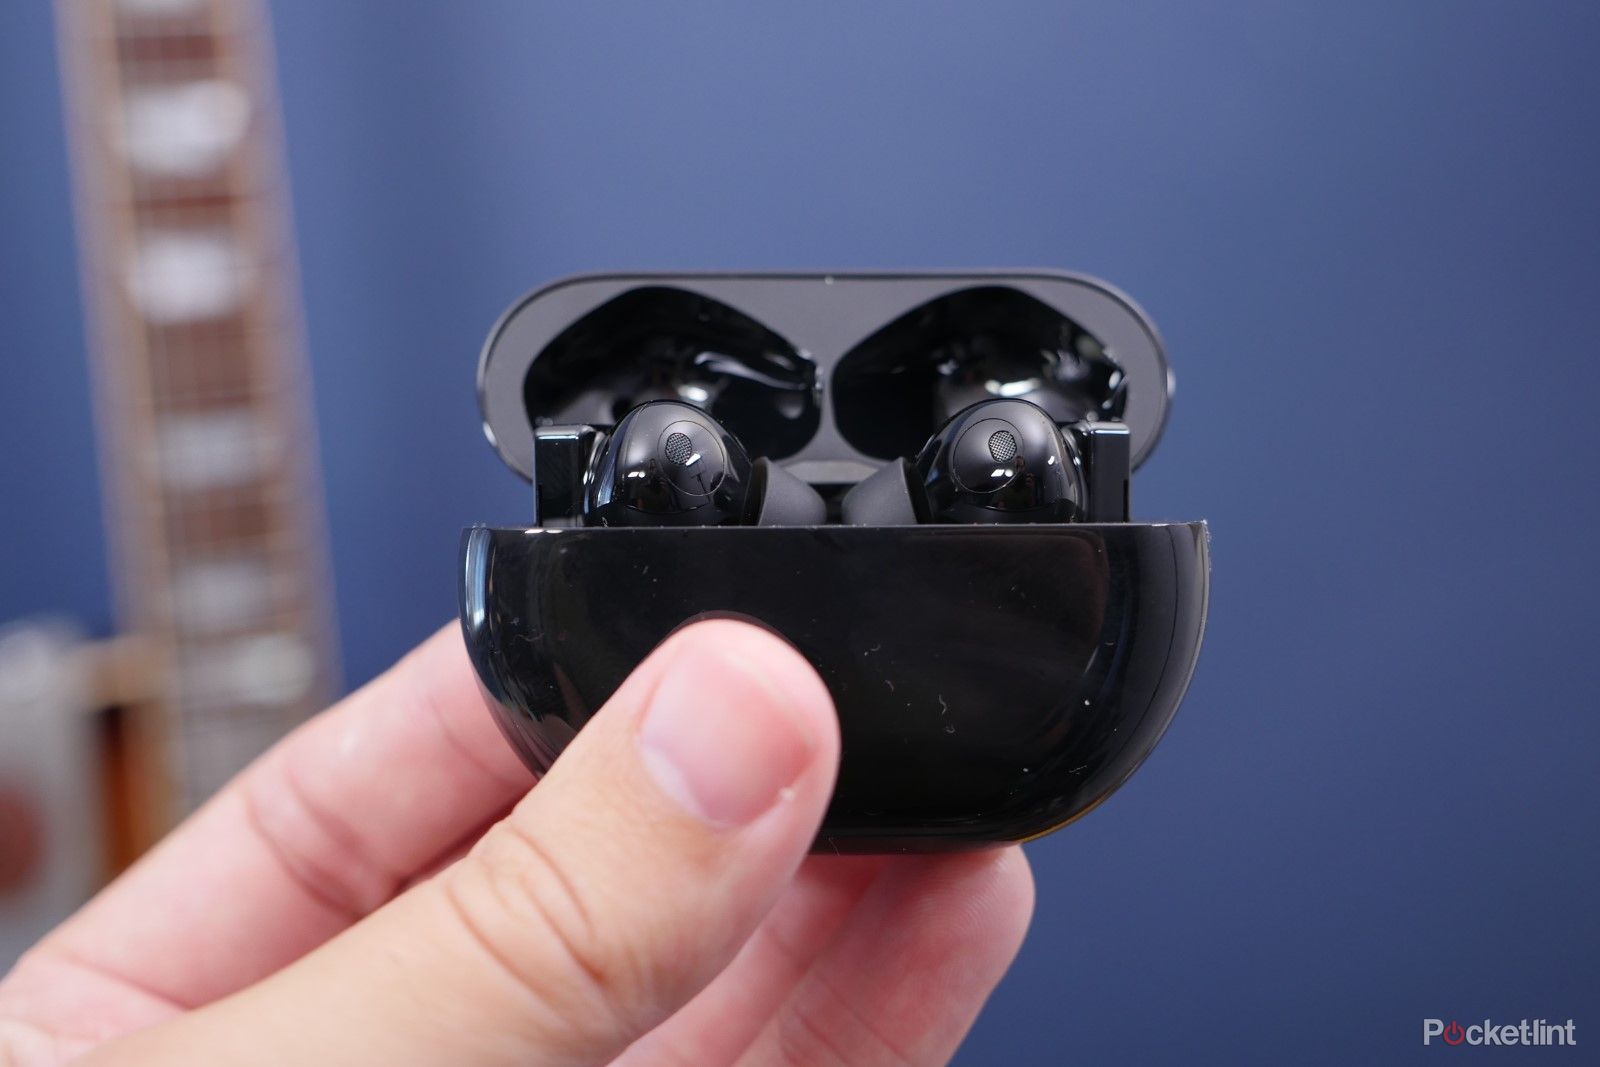 Huawei Freebuds Pro initial review: Convenient ANC true wireless earbuds photo 2